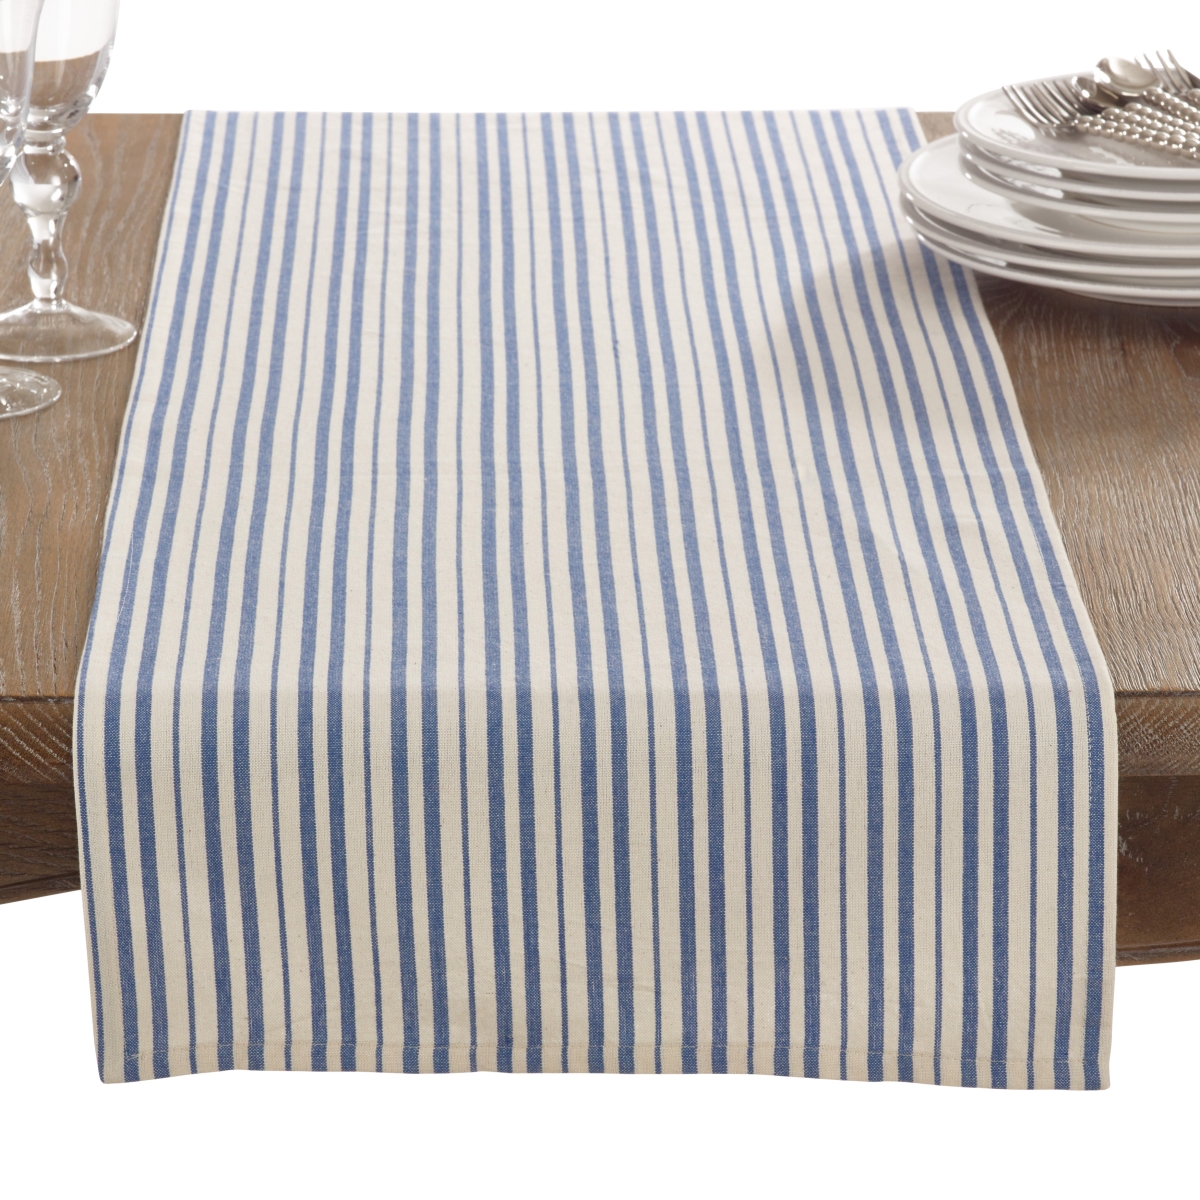 Picture of SARO 0807.FB1672B 16 x 72 in. Timeless Stripes Table Runner  Federal Blue